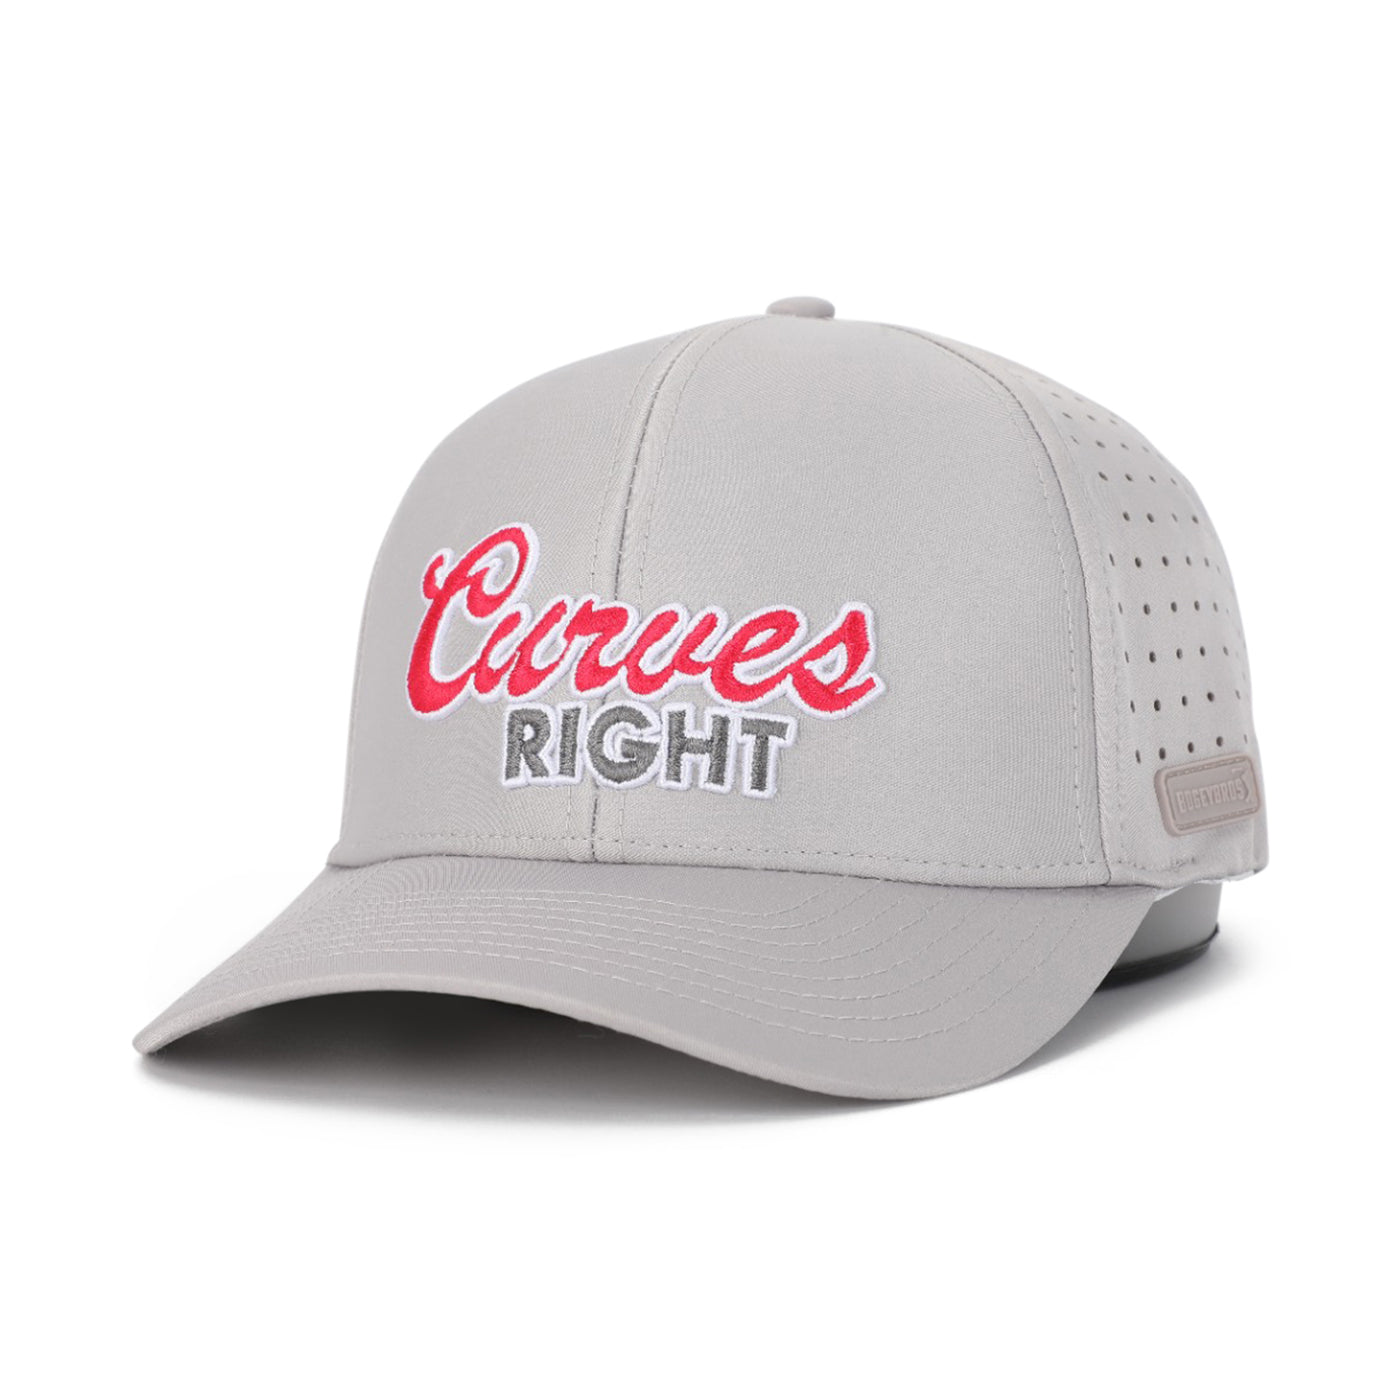 Curves Right - Performance Golf Hat - Fitted